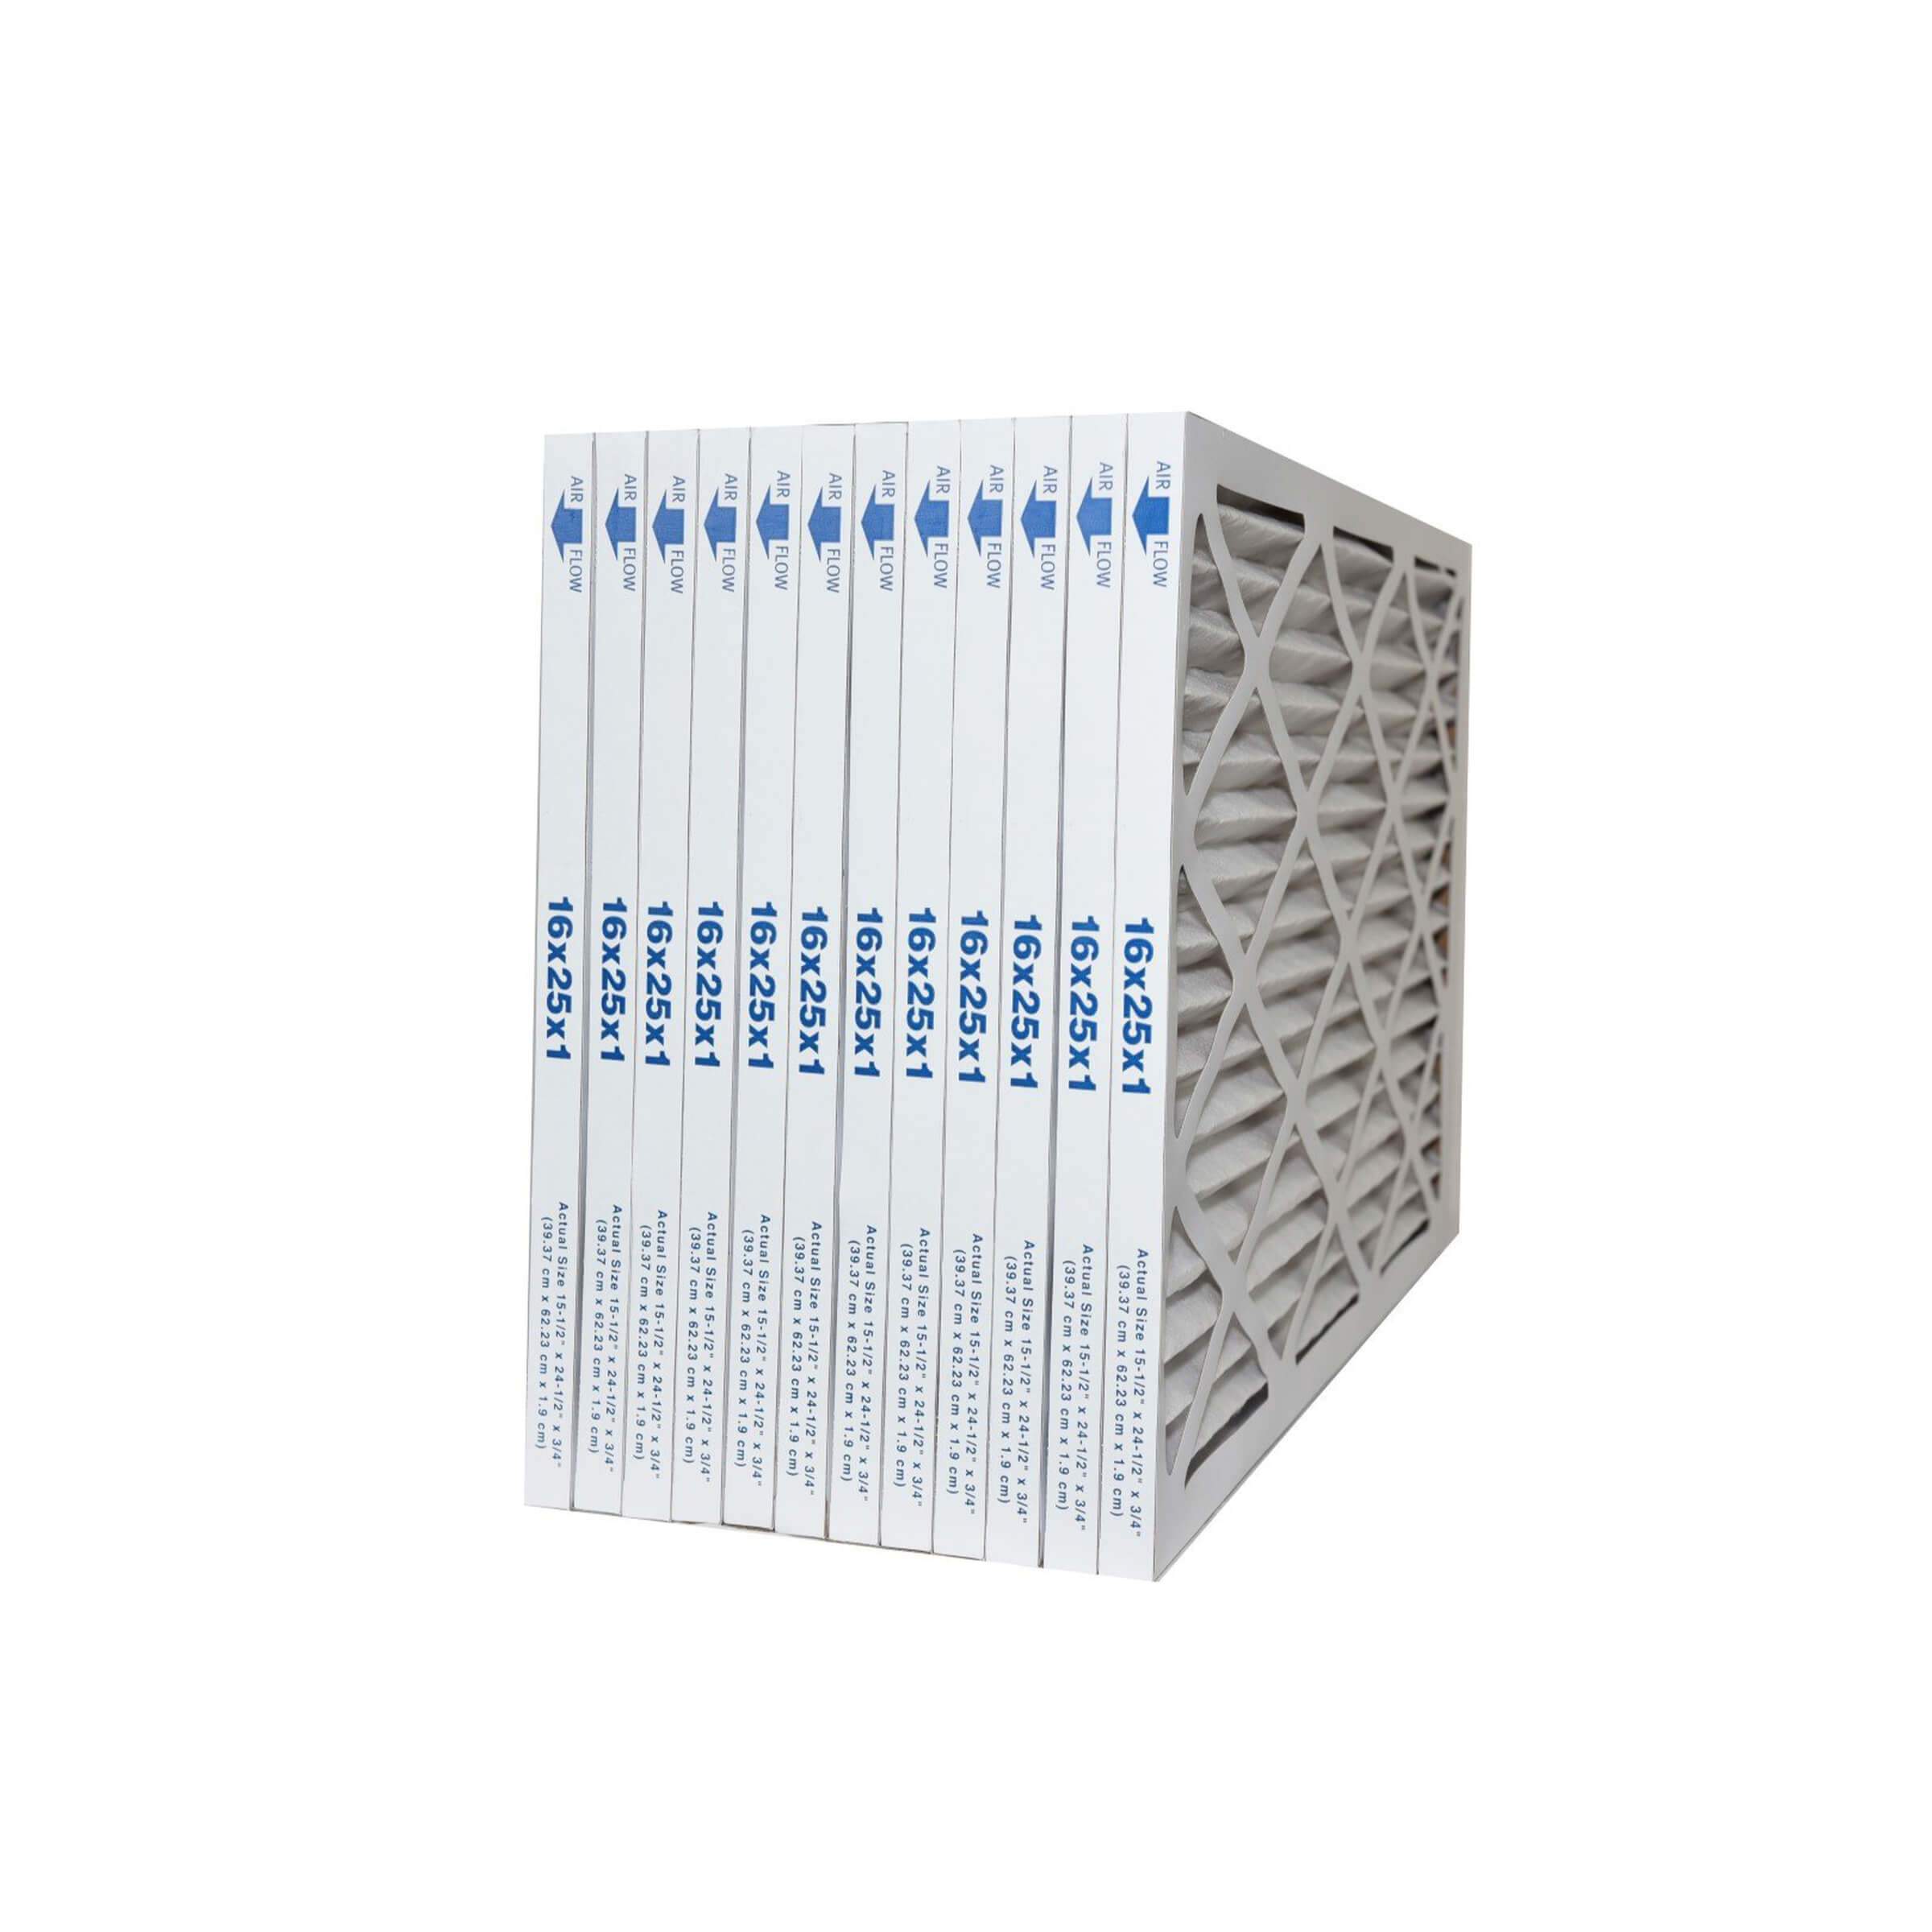 16x25x1 MERV 8 Furnace & A/C Pleated Filter. Case of 12